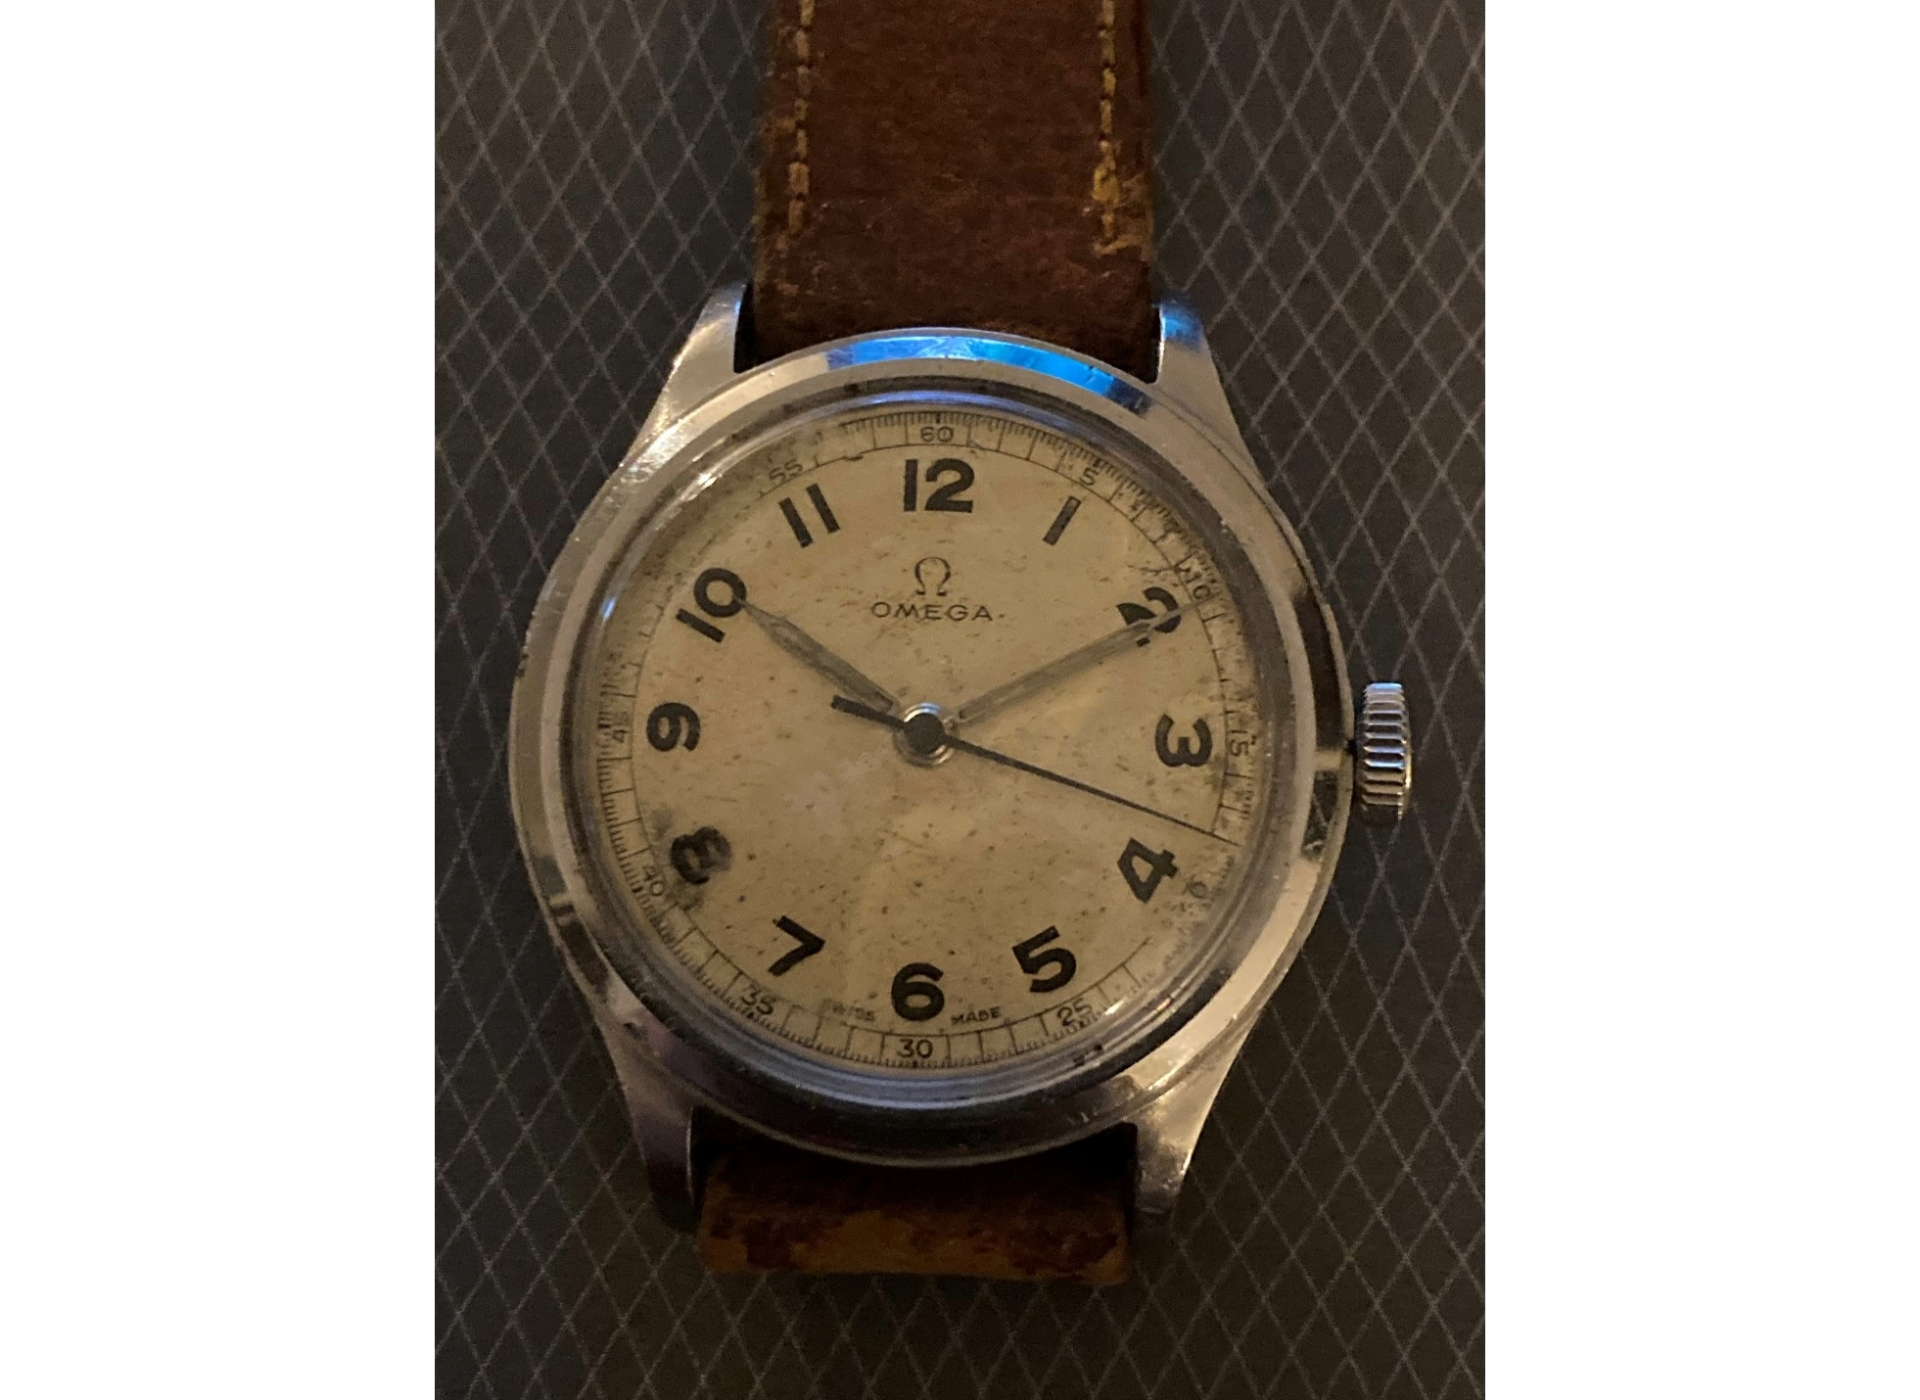 By 1945, the US Army in Europe was also buying Swiss watches to meet demand, such as this Omega with an unusual treatment of the 3 and 9 numerals.